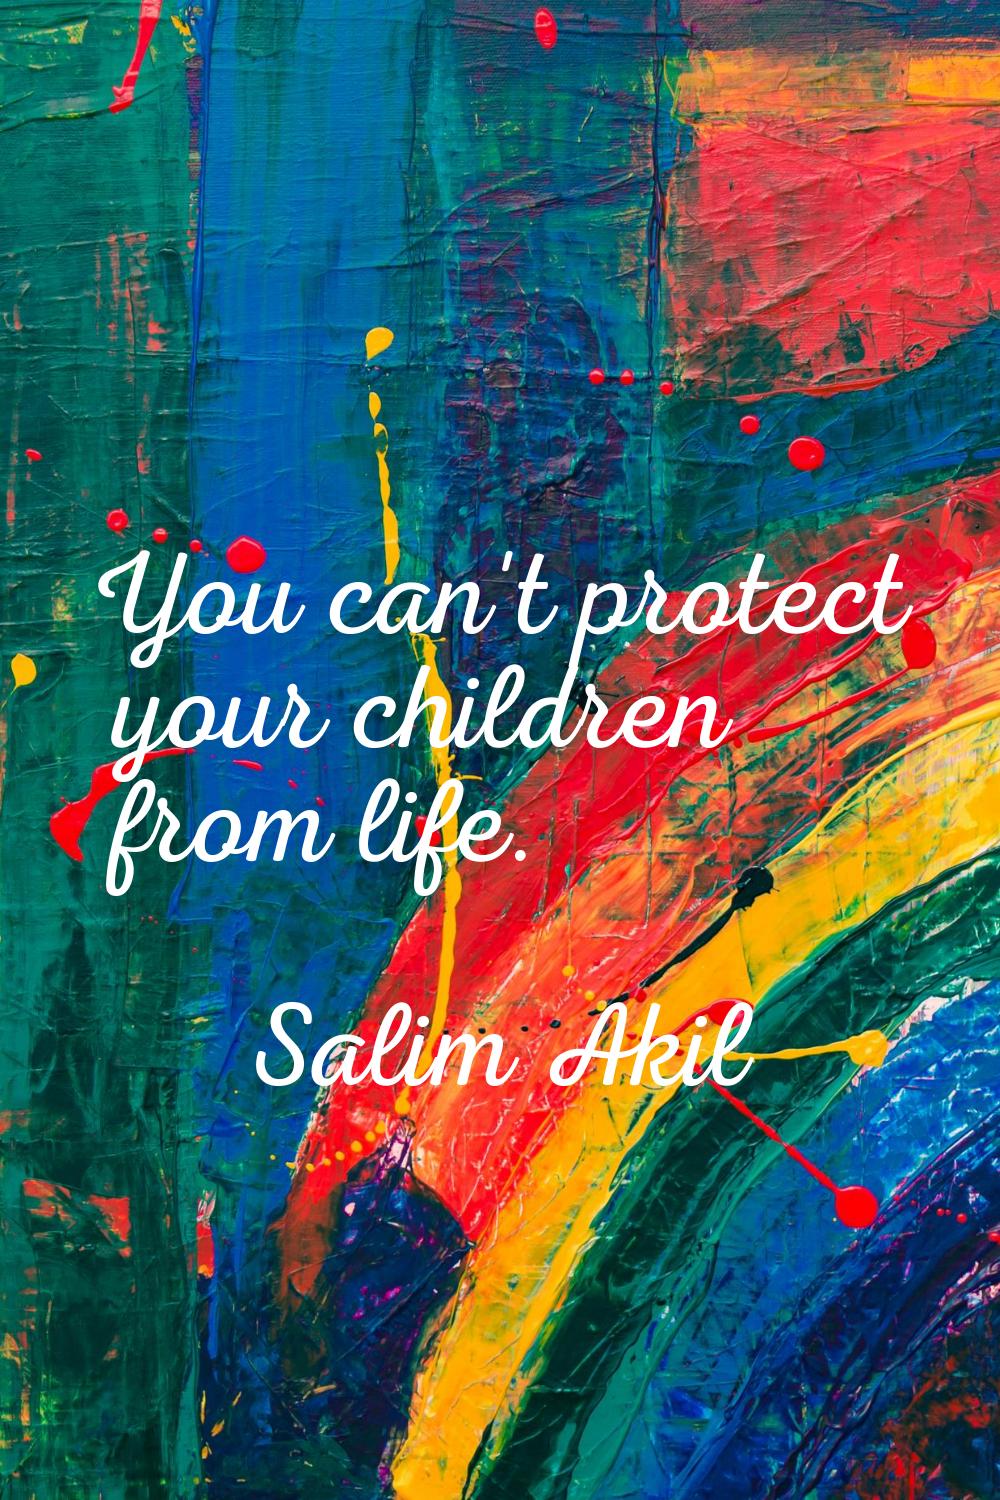 You can't protect your children from life.